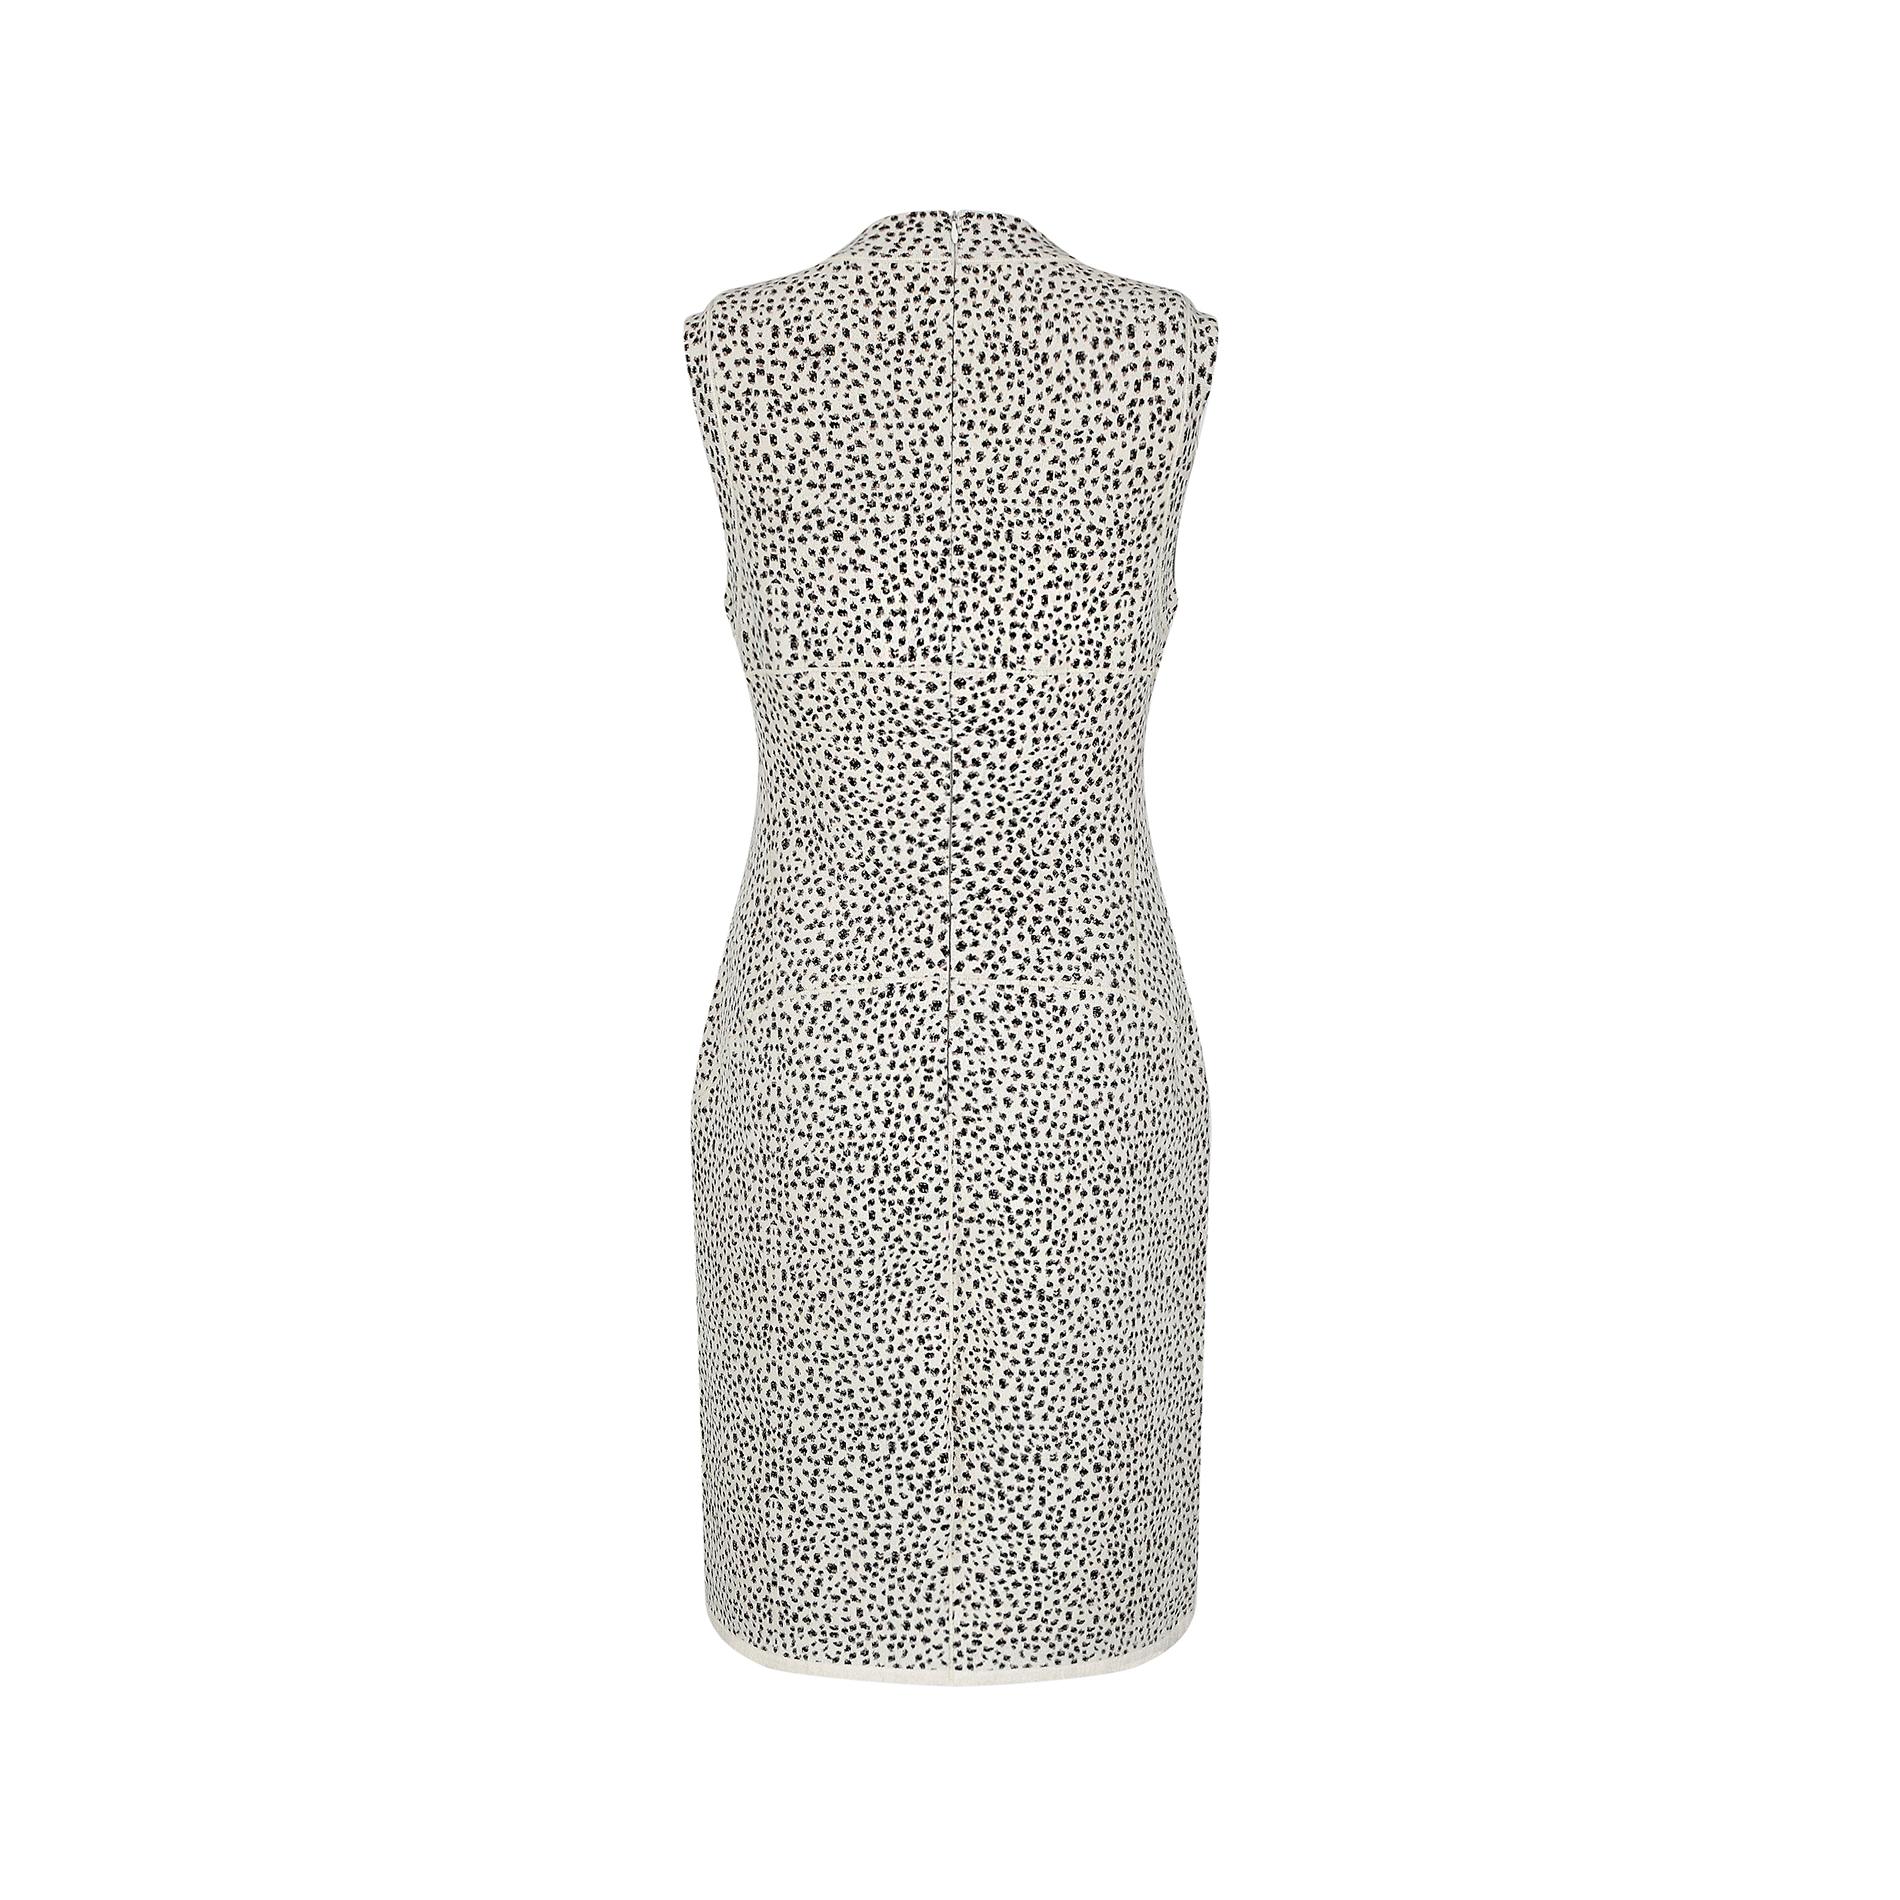 2010s Alaia Snow Leopard Sheath Dress In Excellent Condition For Sale In London, GB